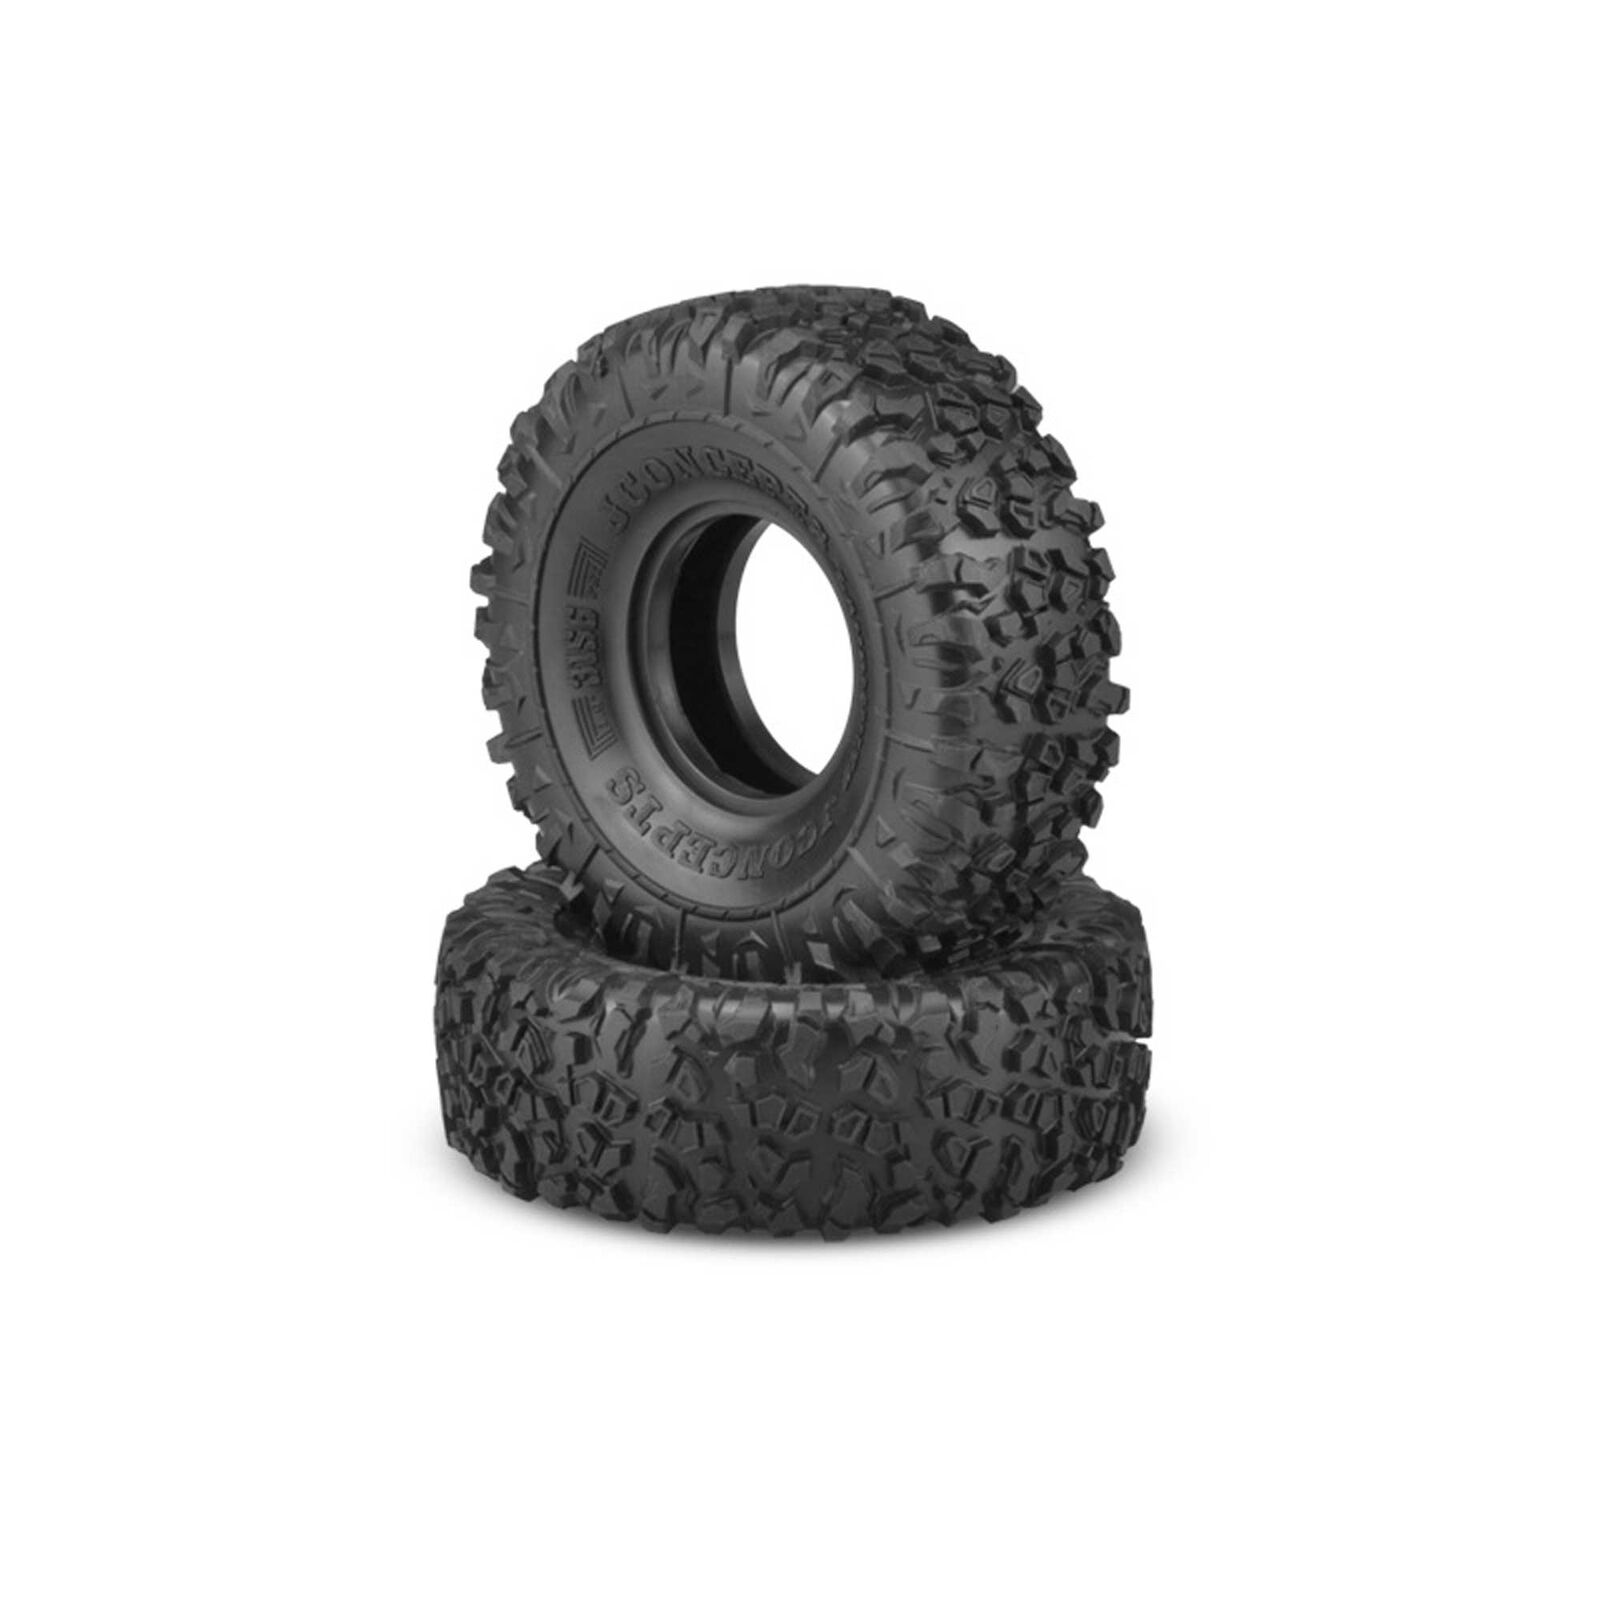 1/10 Landmines Performance Scaler 1.9” Crawler Tires with Inserts, Green Compound (2)